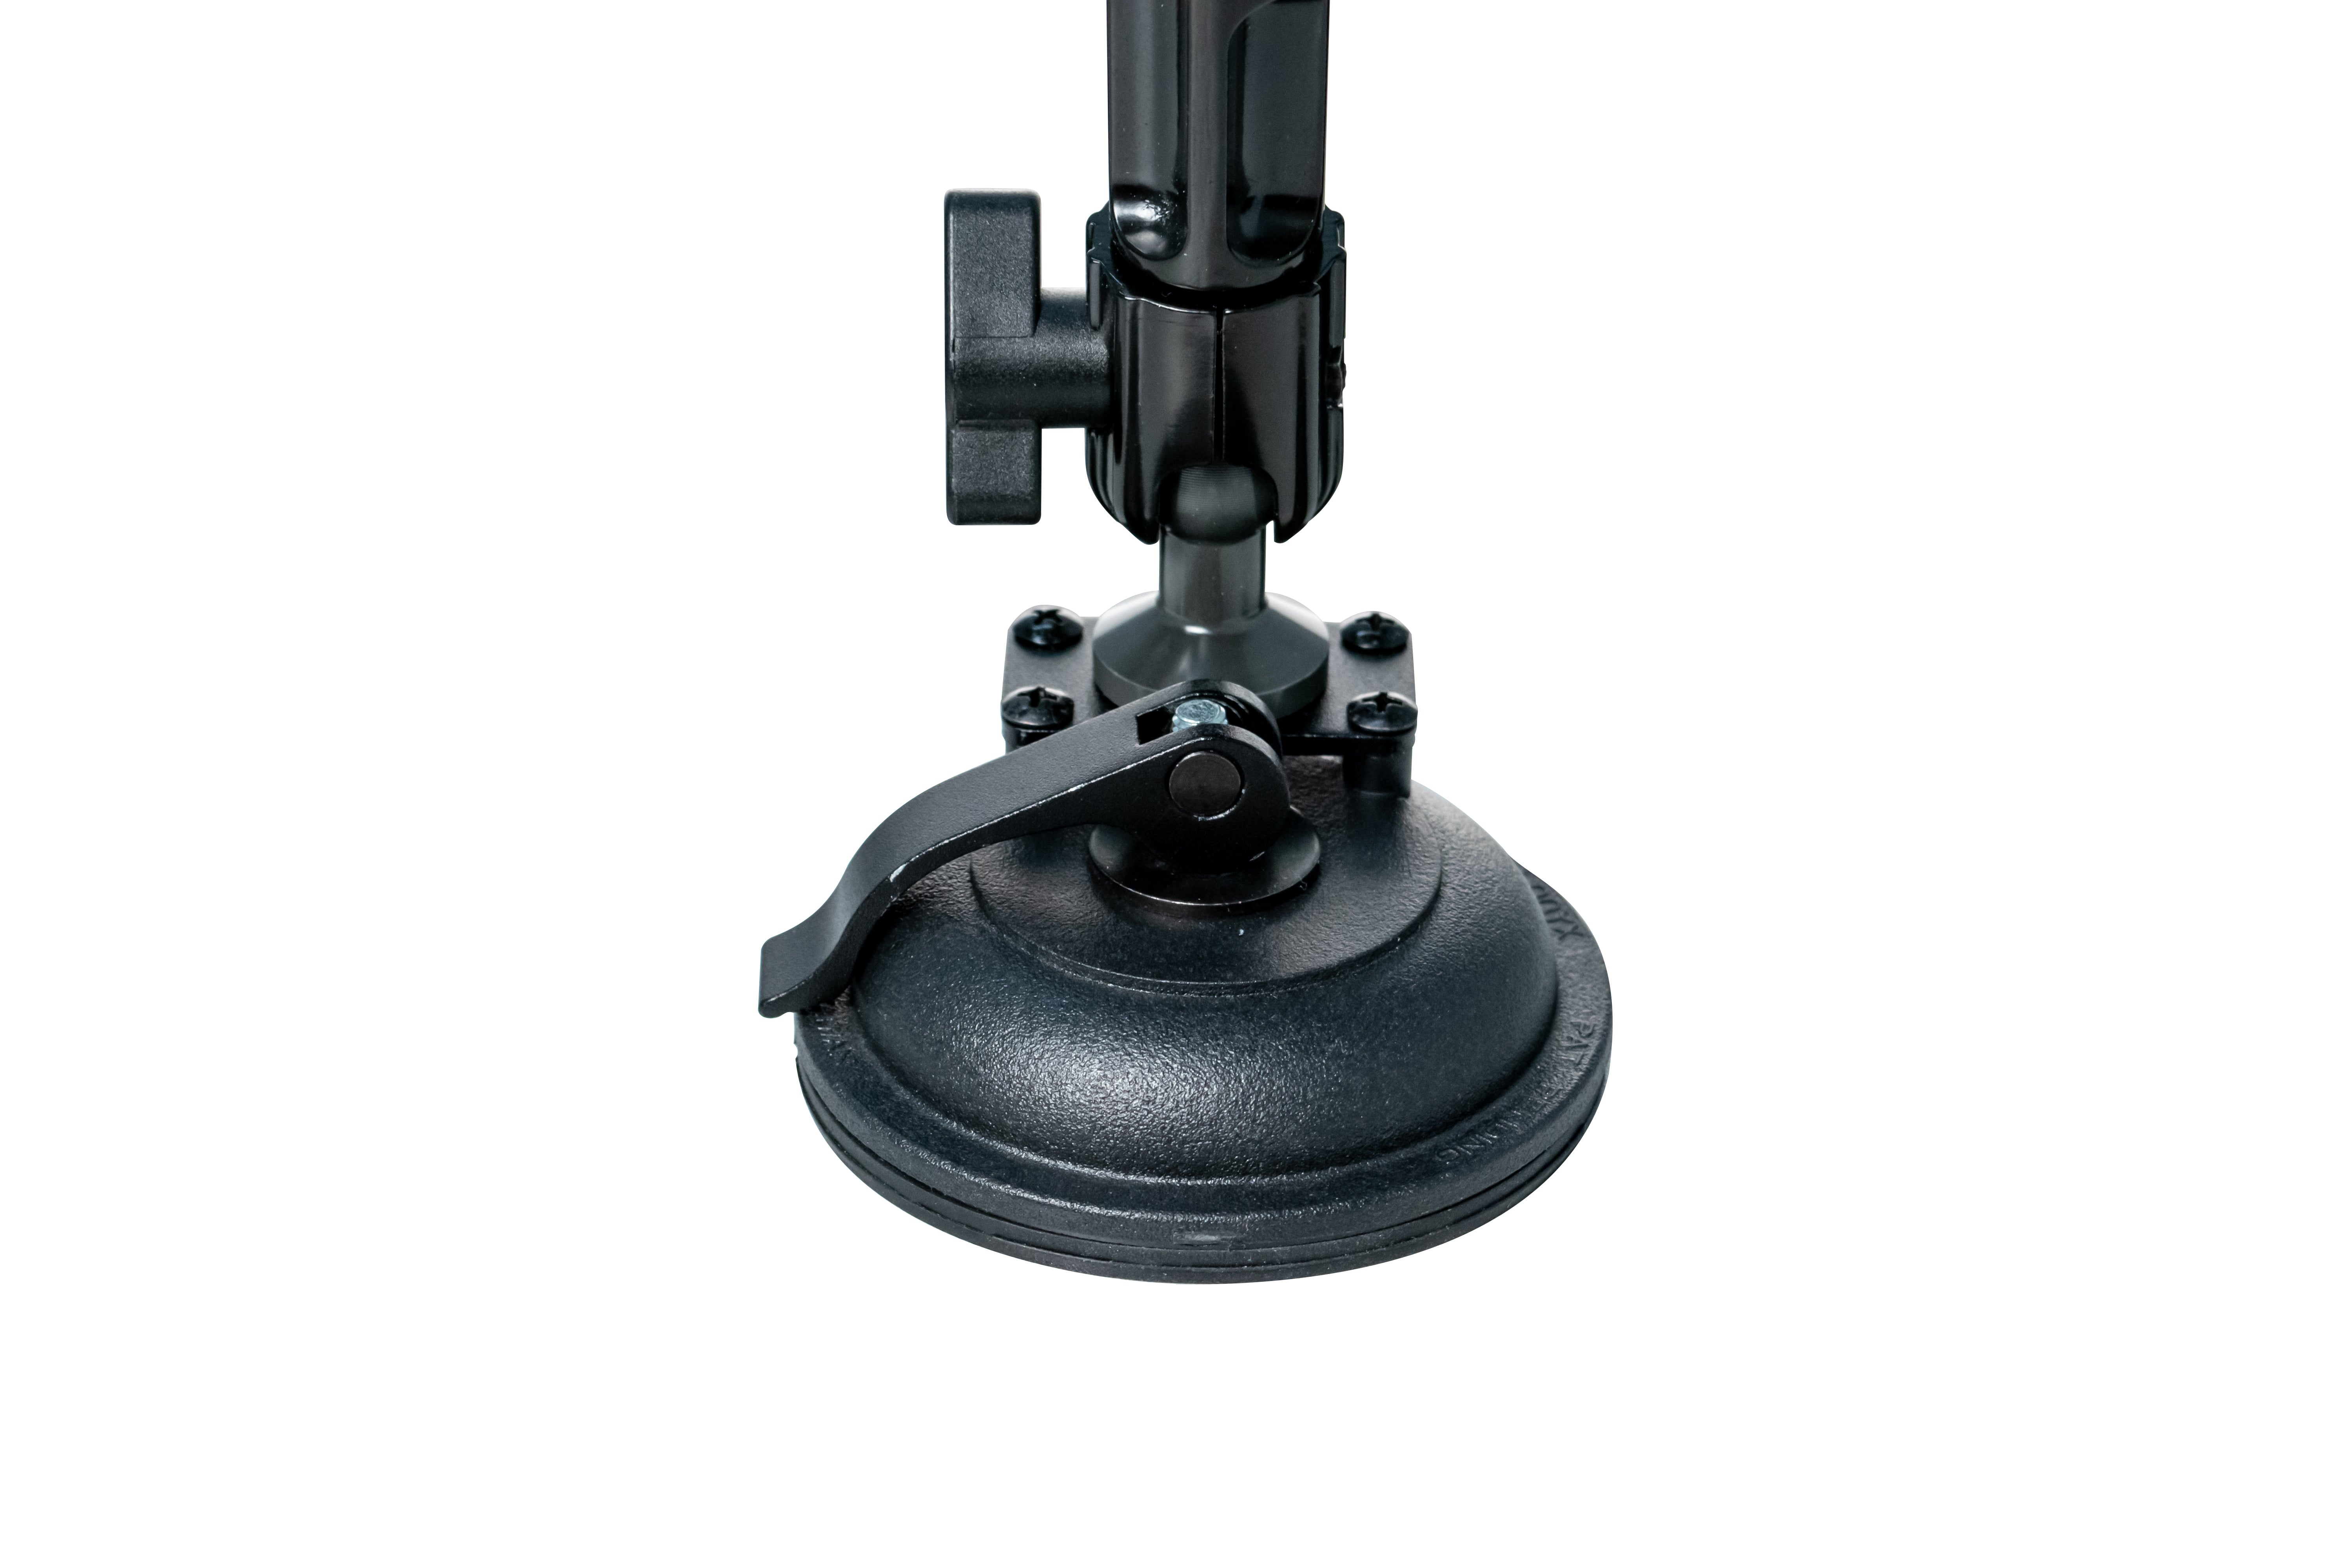 Custom Flex Security Suction Mount for 7 - 14 Inch Tablets